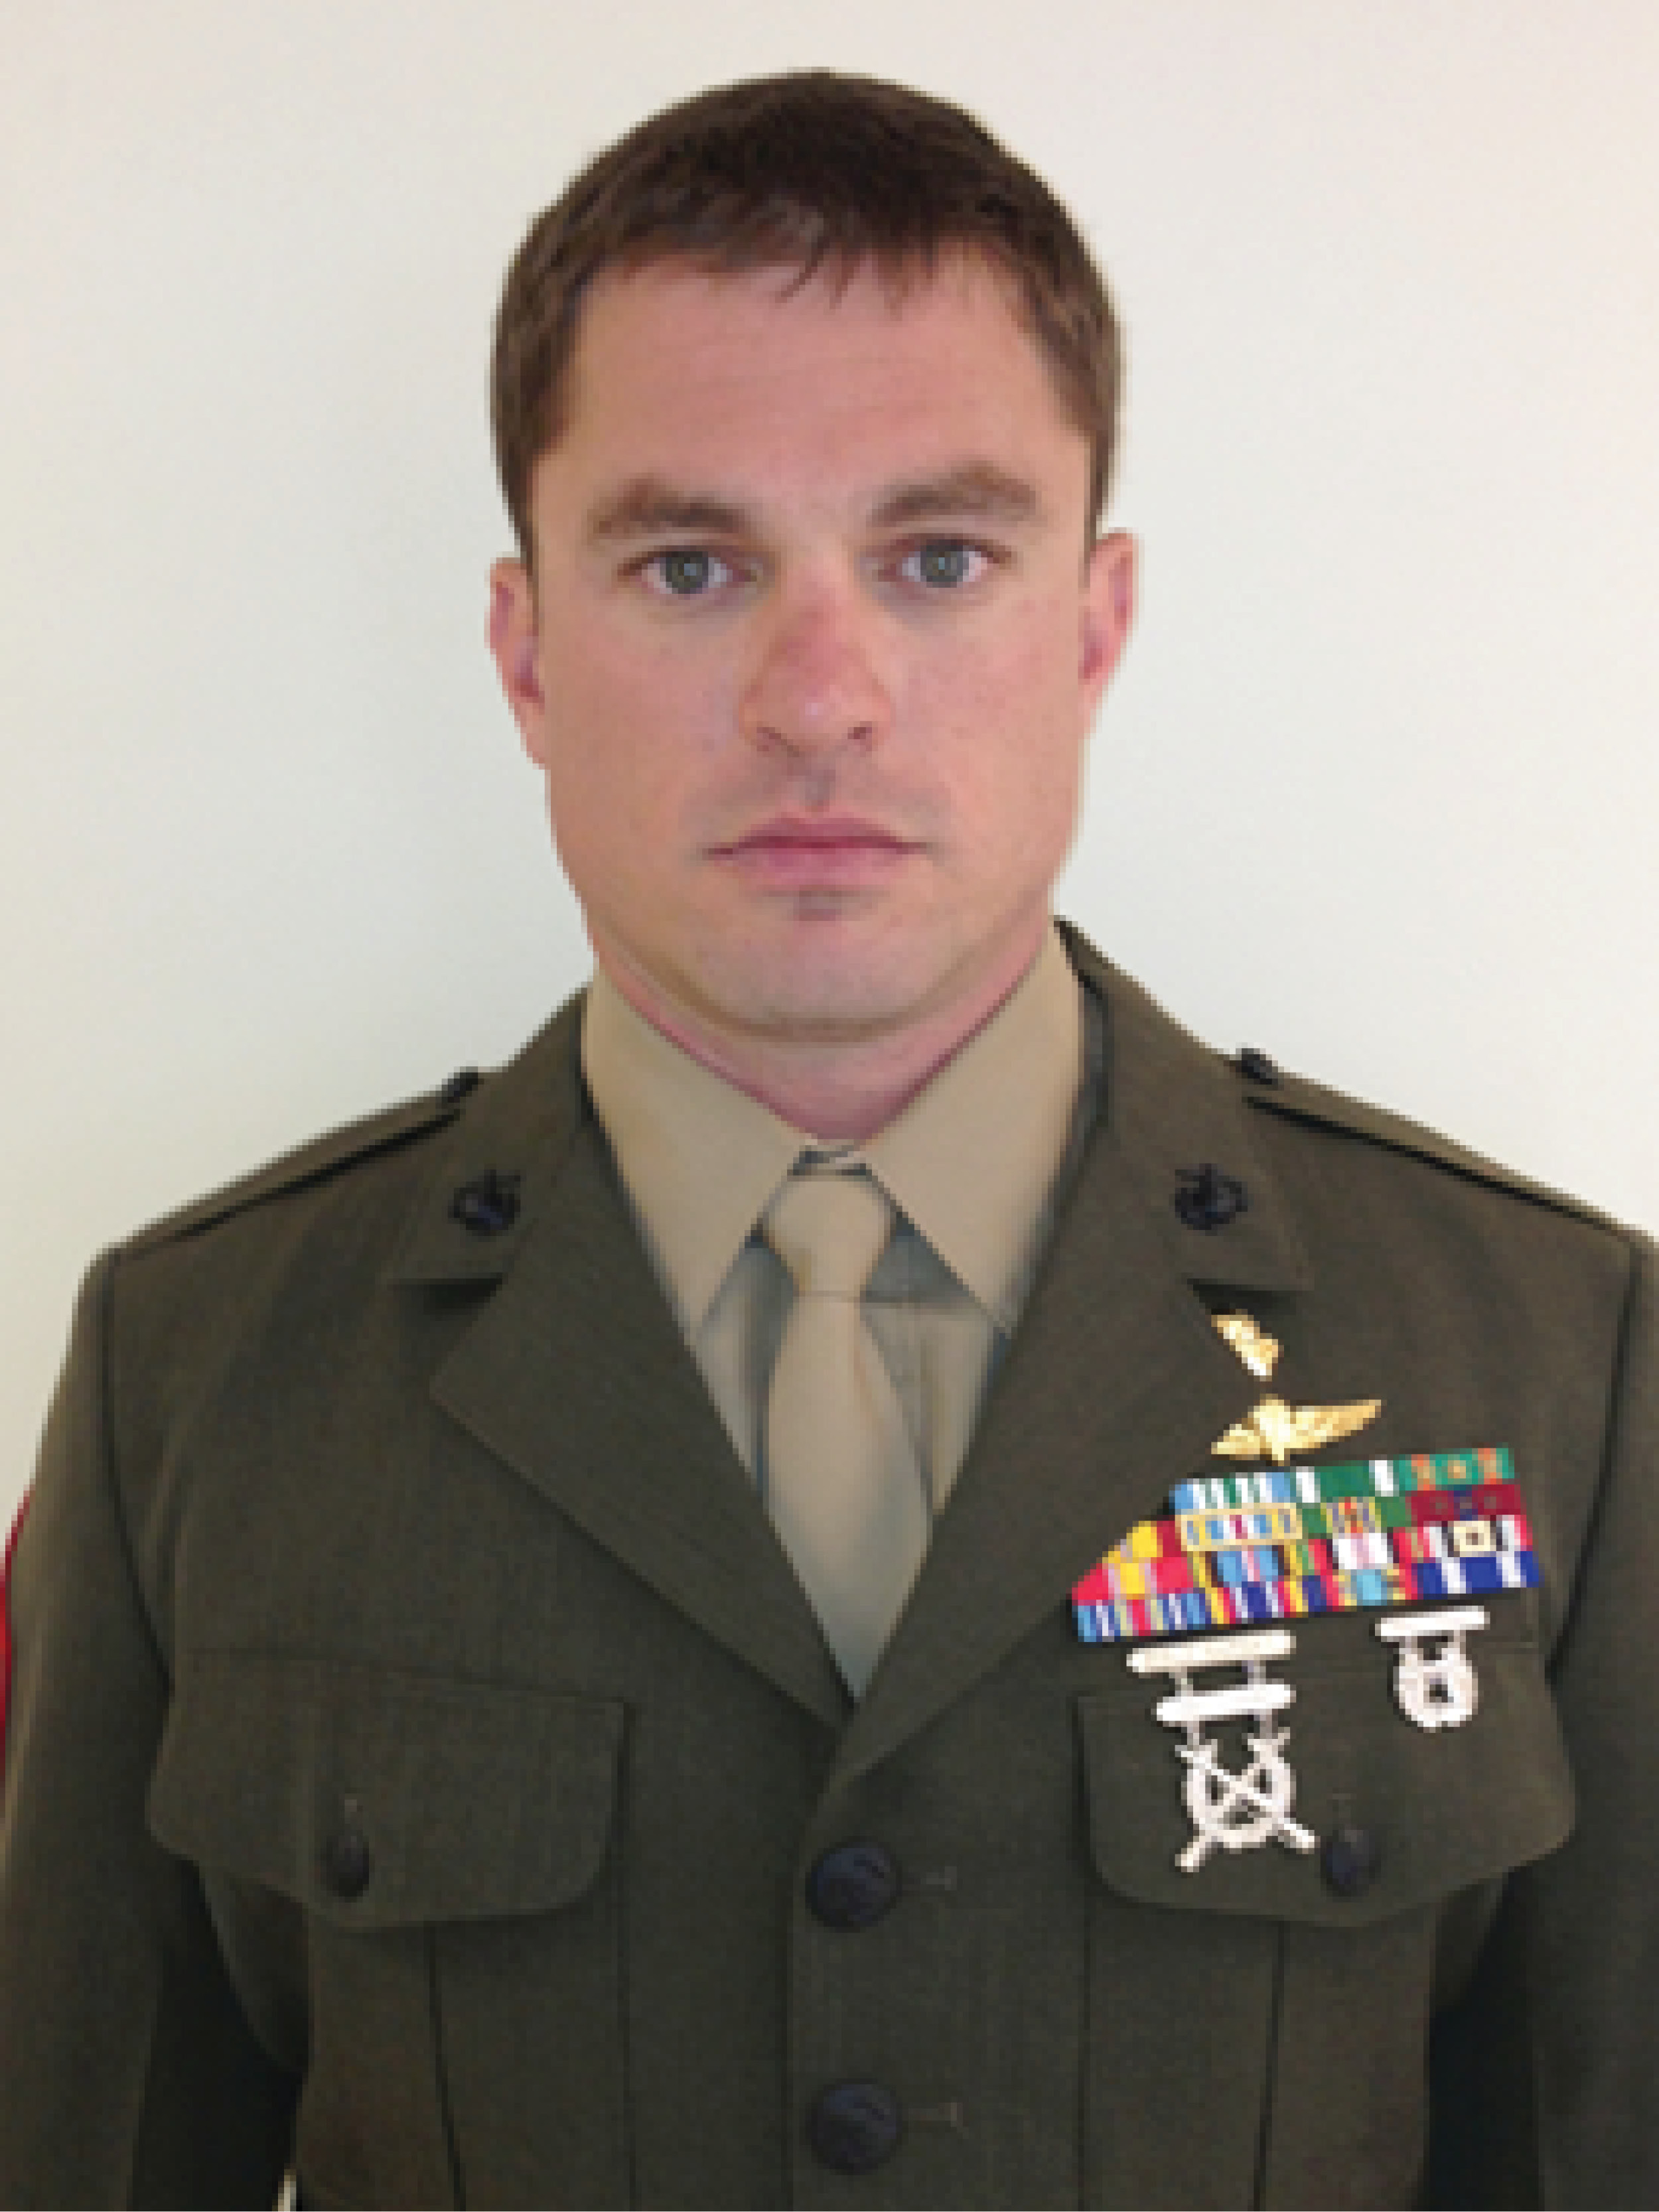 Master Sgt. Thomas Saunders died when a U.S. Army UH-60 Blackhawk Helicopter crashed near Eglin, Florida, at approximately 8:30 p.m. March 10, 2015. Saunders, 33, a native of Williamsburg, Virginia, served within U.S. Marine Corps Forces, Special Operational Command as a team chief. His personal awards include the Joint Service Commendation Medal, (2) Navy Marine Commedation Medal, (5) Navy and Marine Corps Achievement Medals, the Combat Infantry Badge, and (5) Good Conduct Medals.